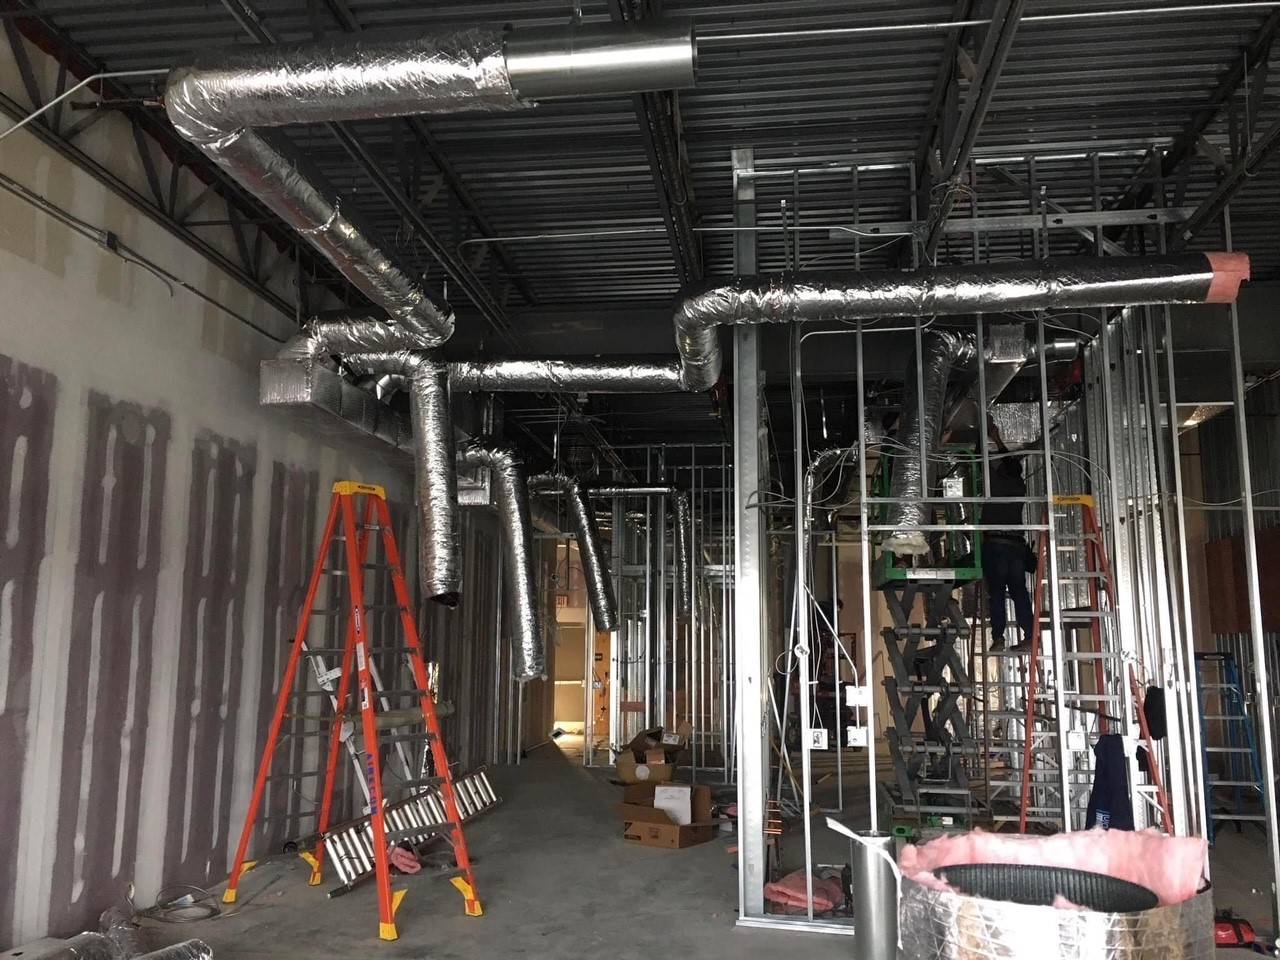 AireCom install crew working on installing ductwork for a new restaurant